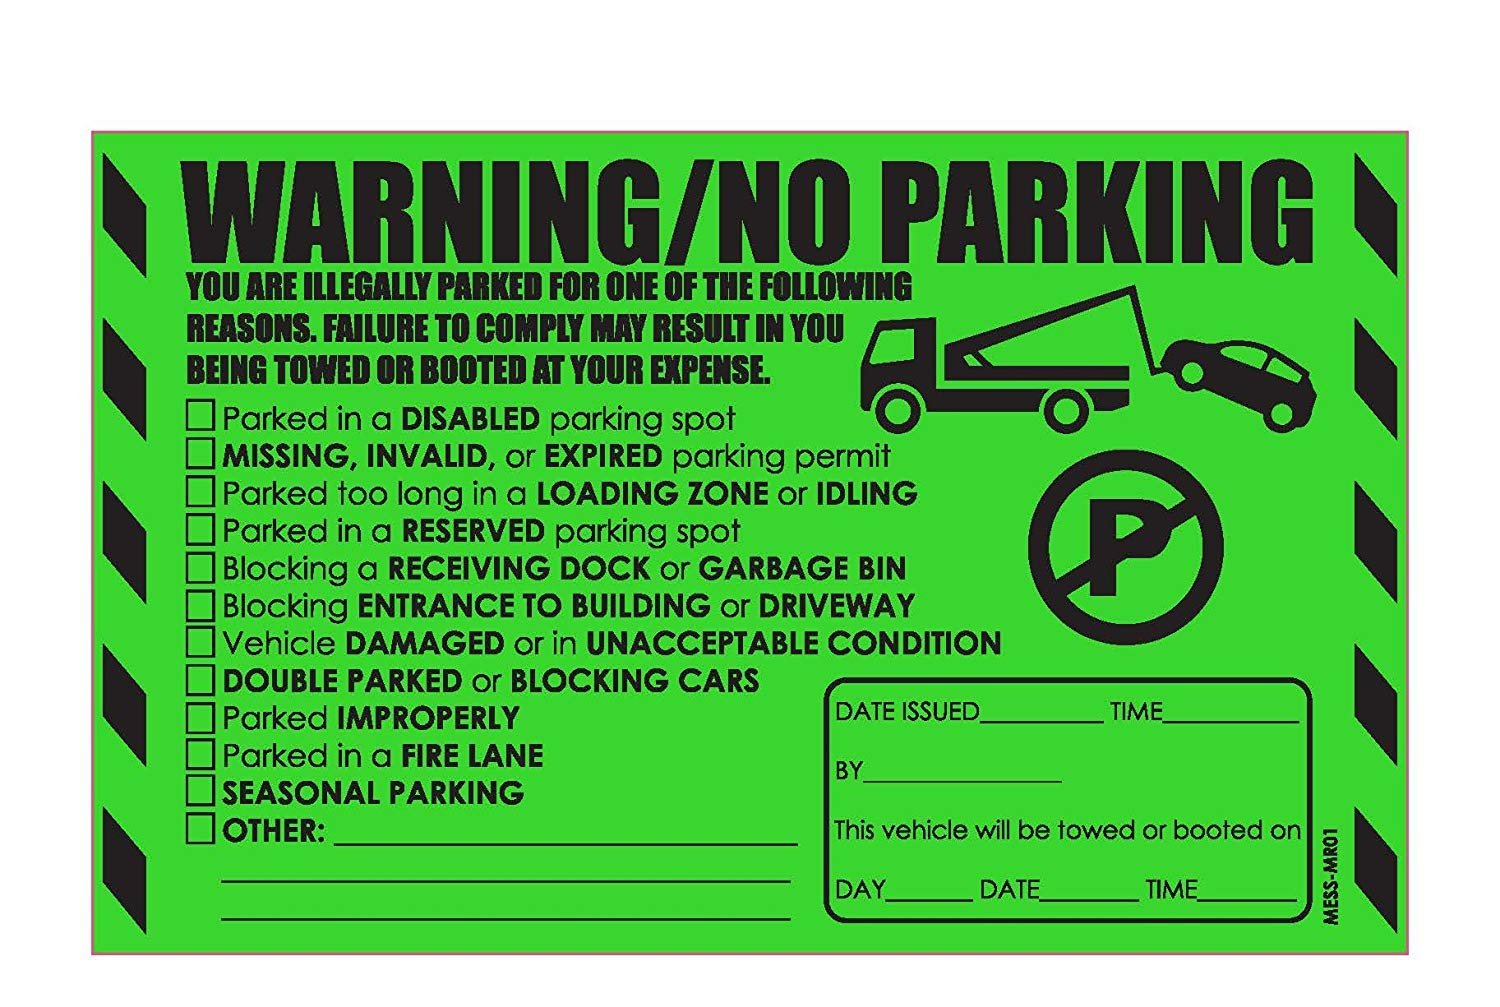 Parking Violation Stickers 5X8" GREEN No Parking Illegally Parked Cars Window eBay